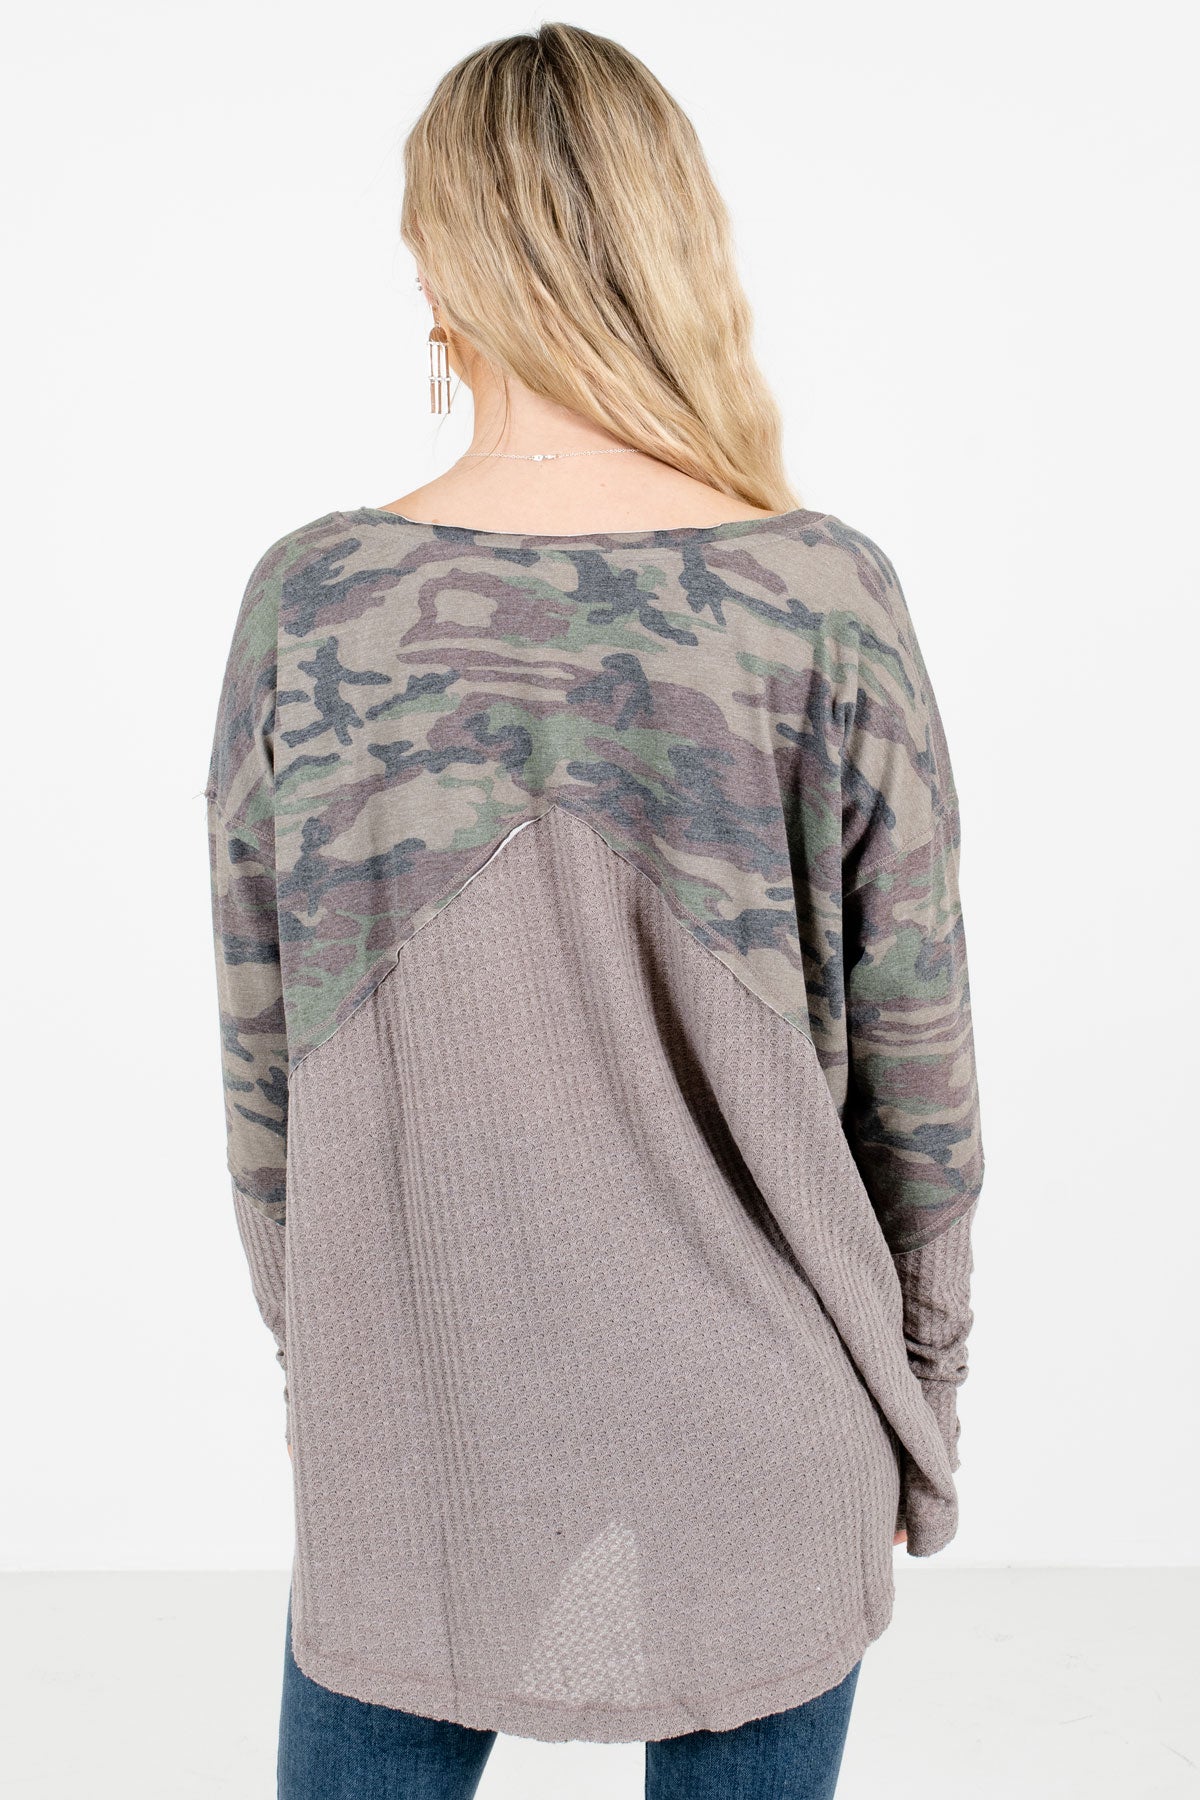 Women's Gray Waffle Knit Material Boutique Tops